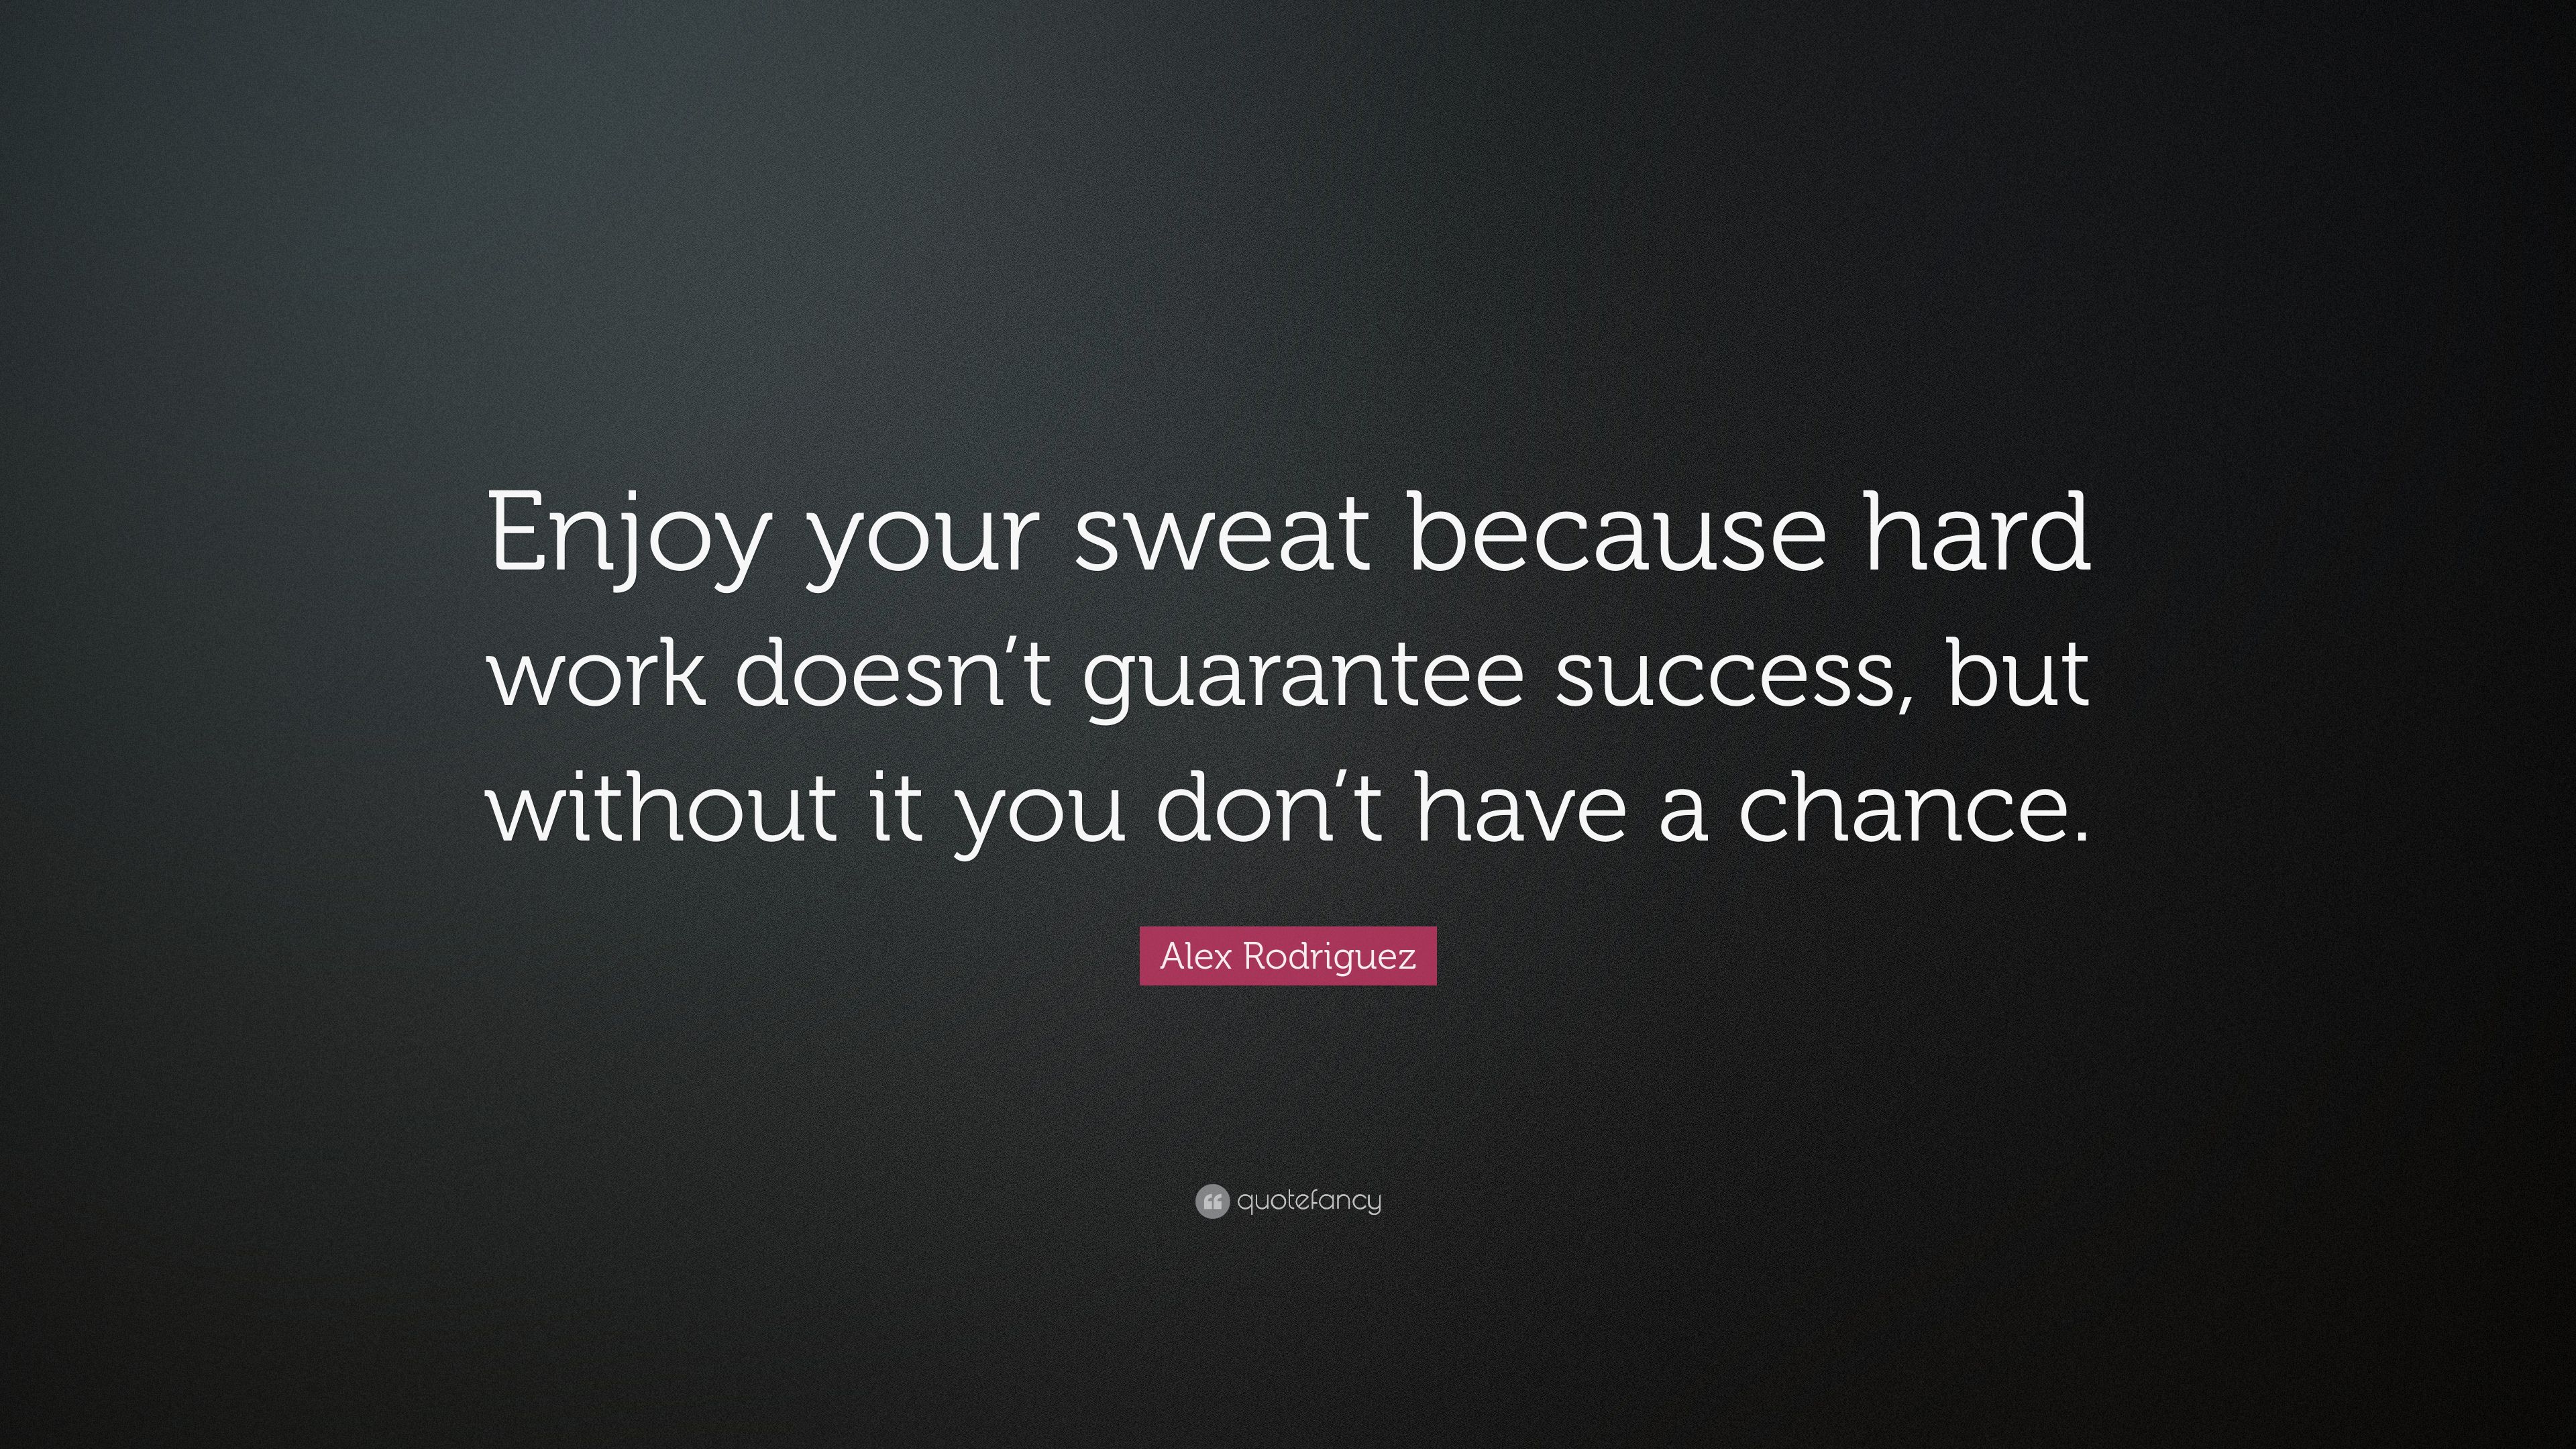 Alex Rodriguez Quote: “Enjoy your sweat because hard work doesn't